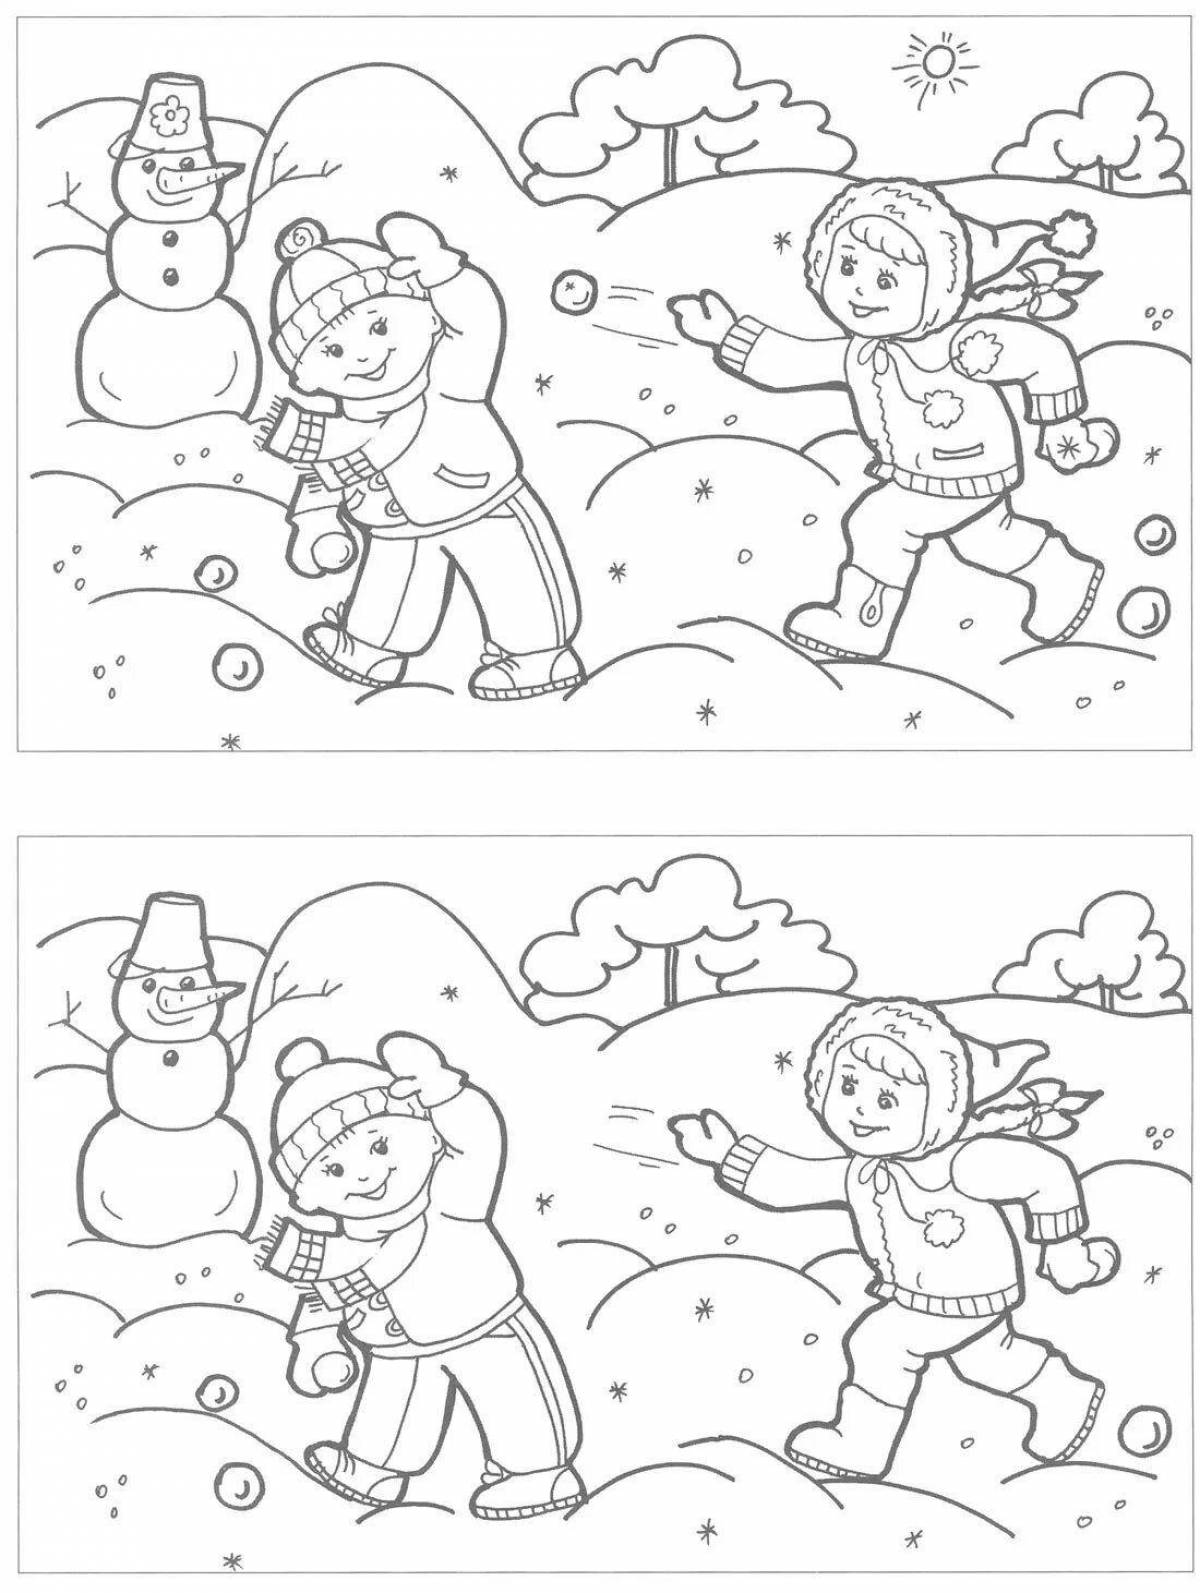 Live coloring signs of winter for children